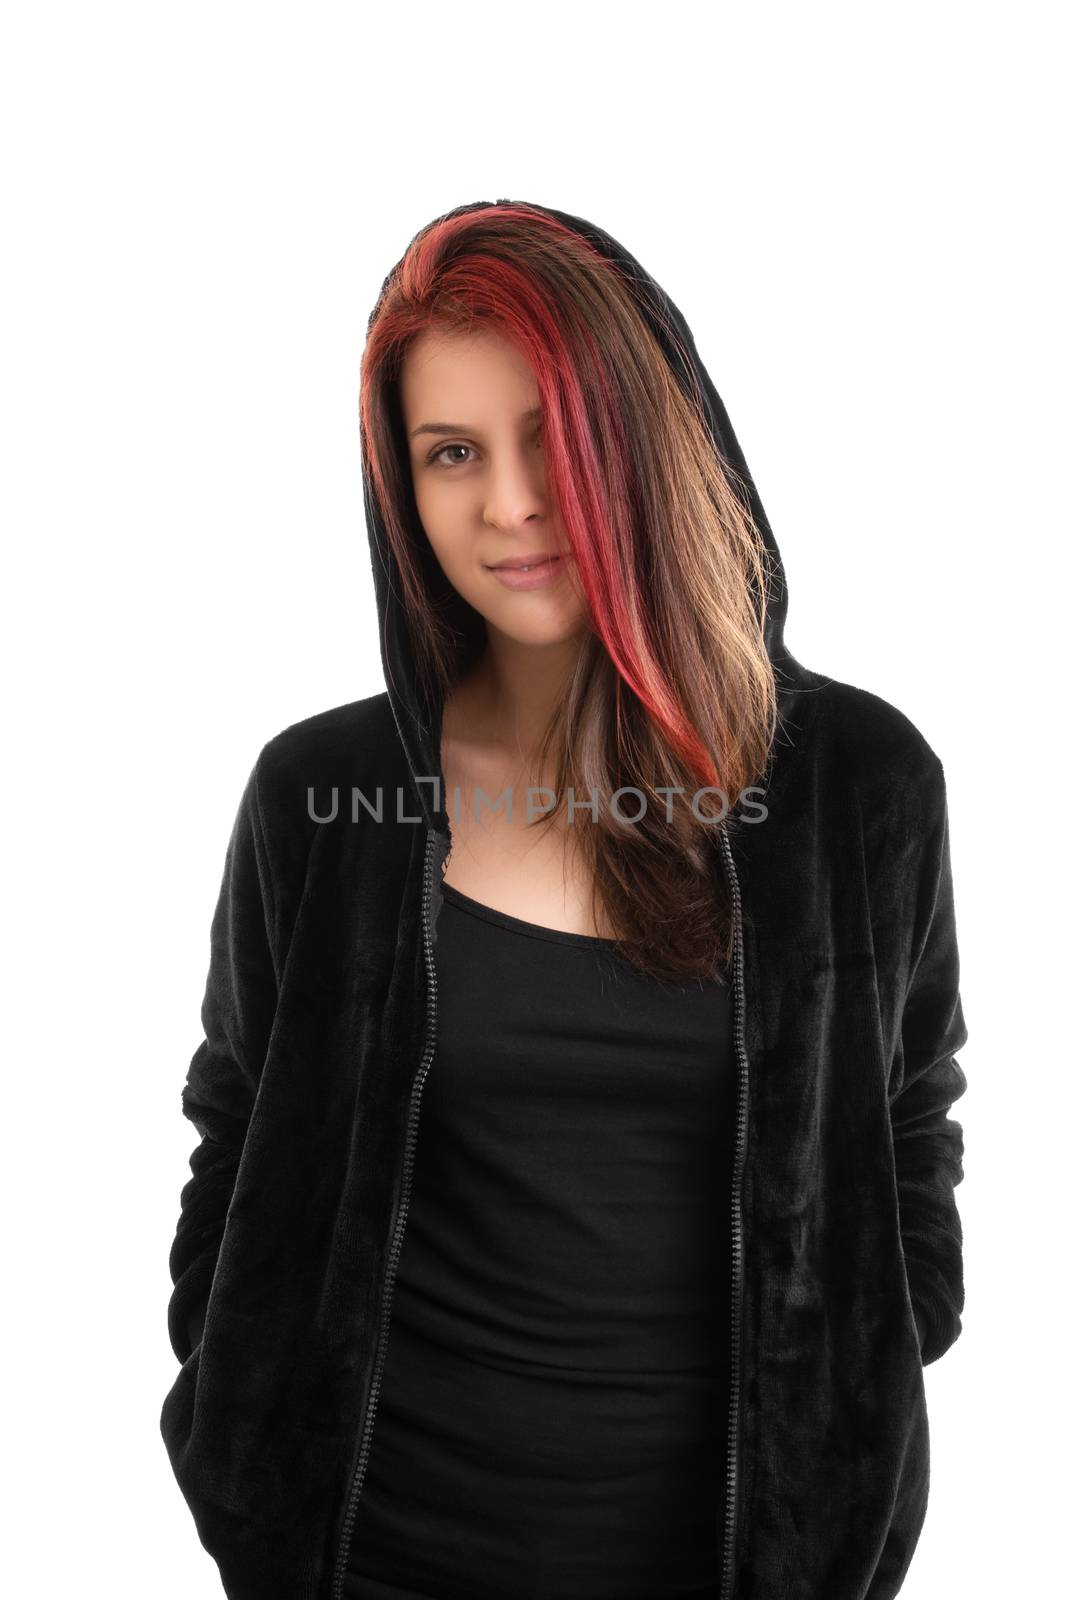 Portrait of a beautiful young girl in a hooded sweatshirt, isolated on white background.